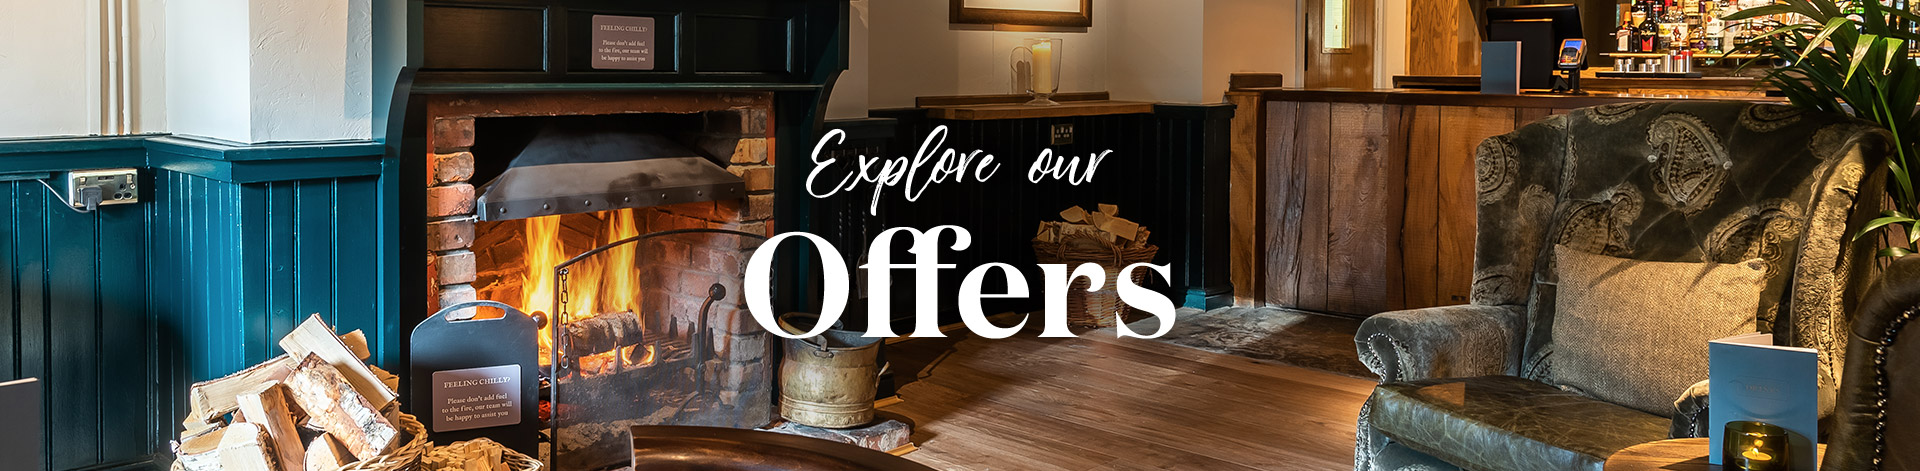 Our latest offers at The Lambs' Green Inn